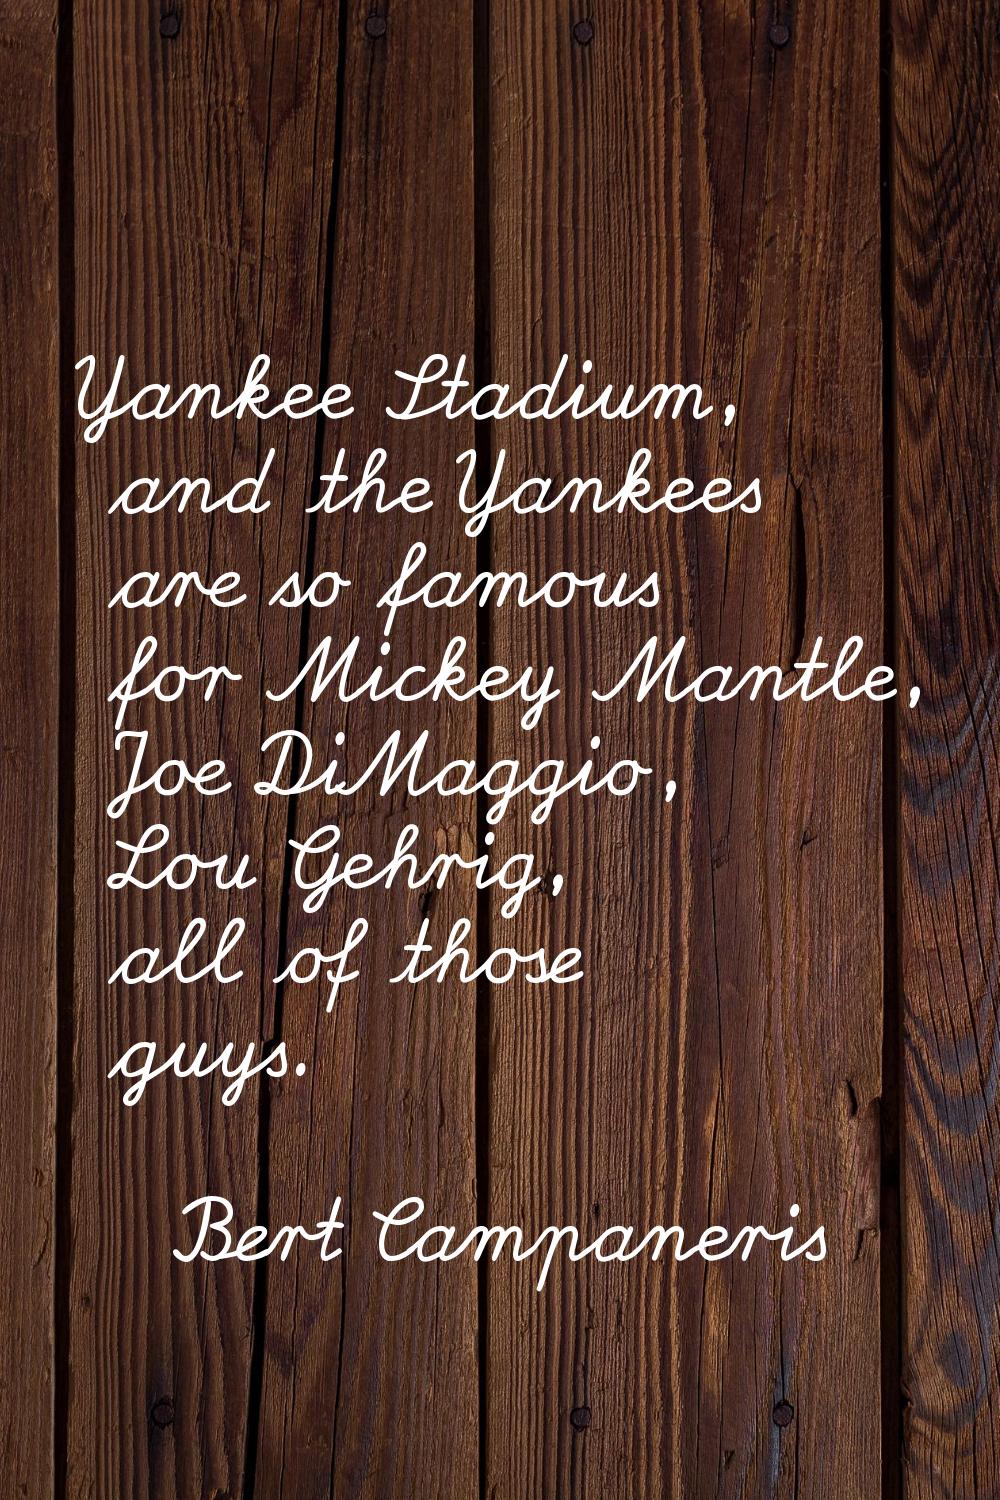 Yankee Stadium, and the Yankees are so famous for Mickey Mantle, Joe DiMaggio, Lou Gehrig, all of t